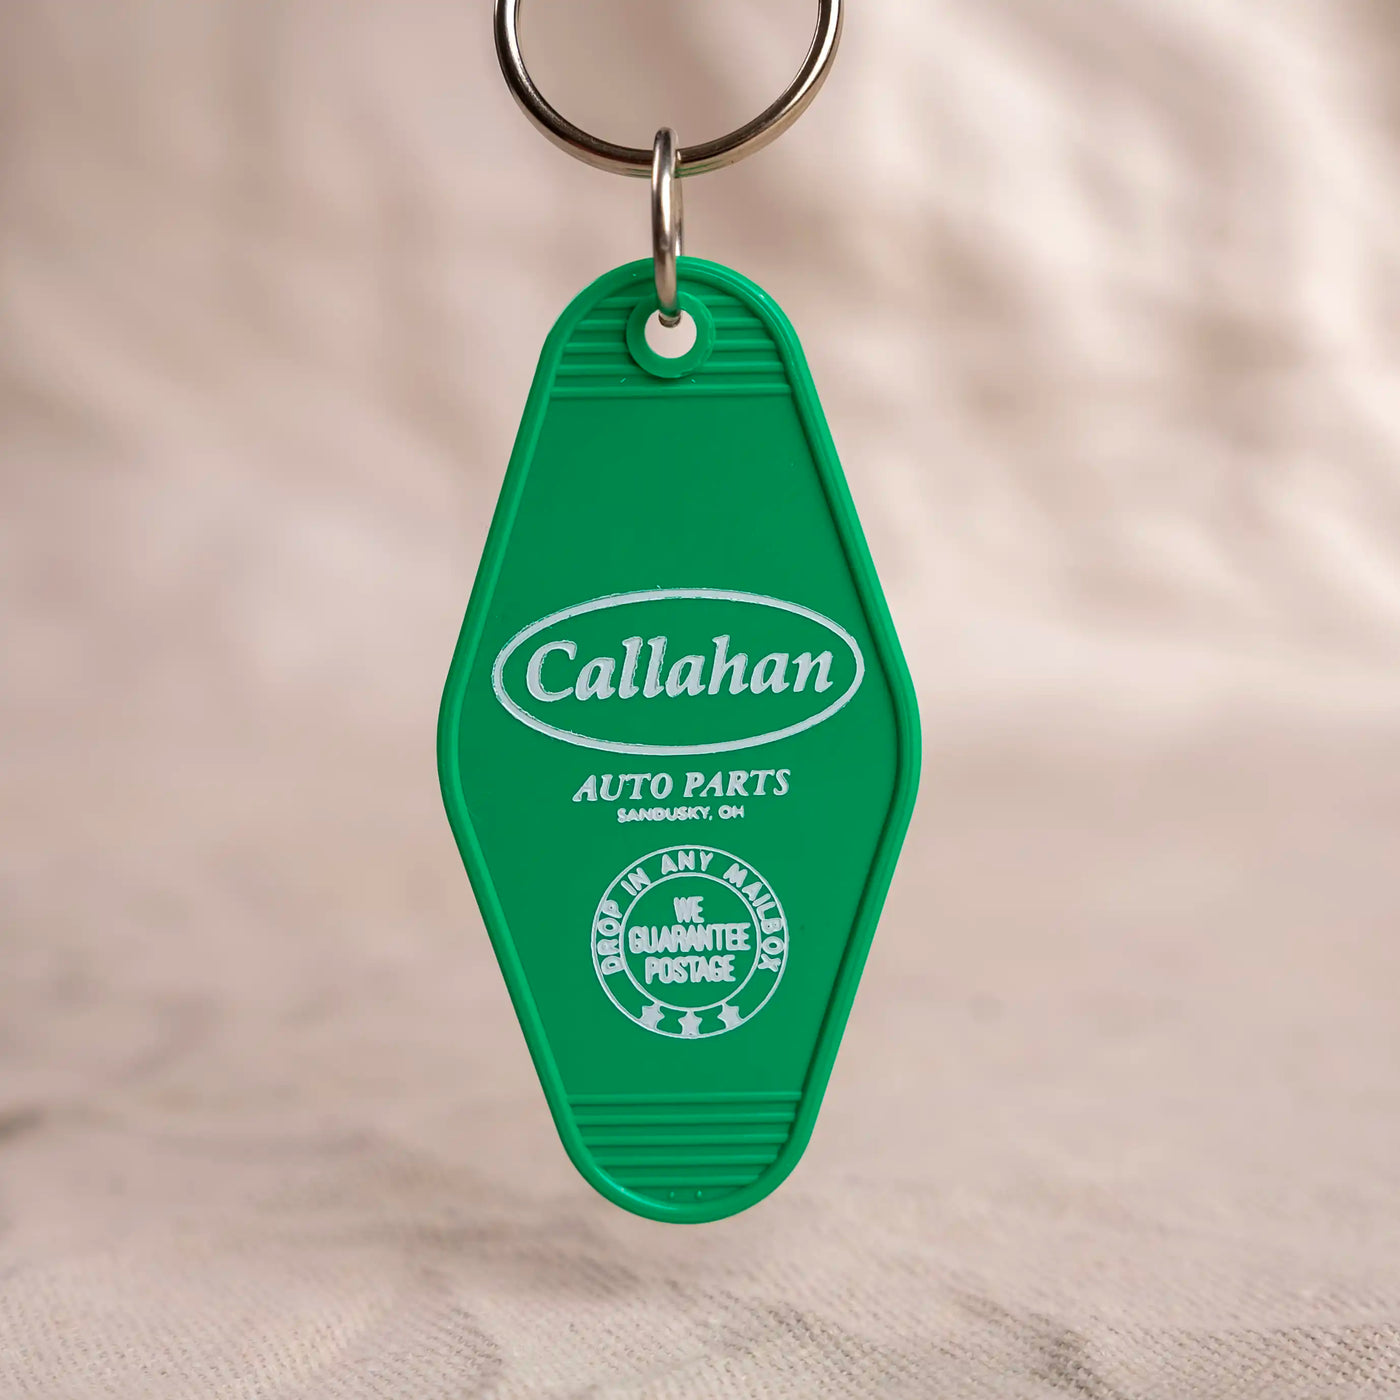 Callahan Auto Parts motel ket fob. Green key fob with white logo and lettering. 